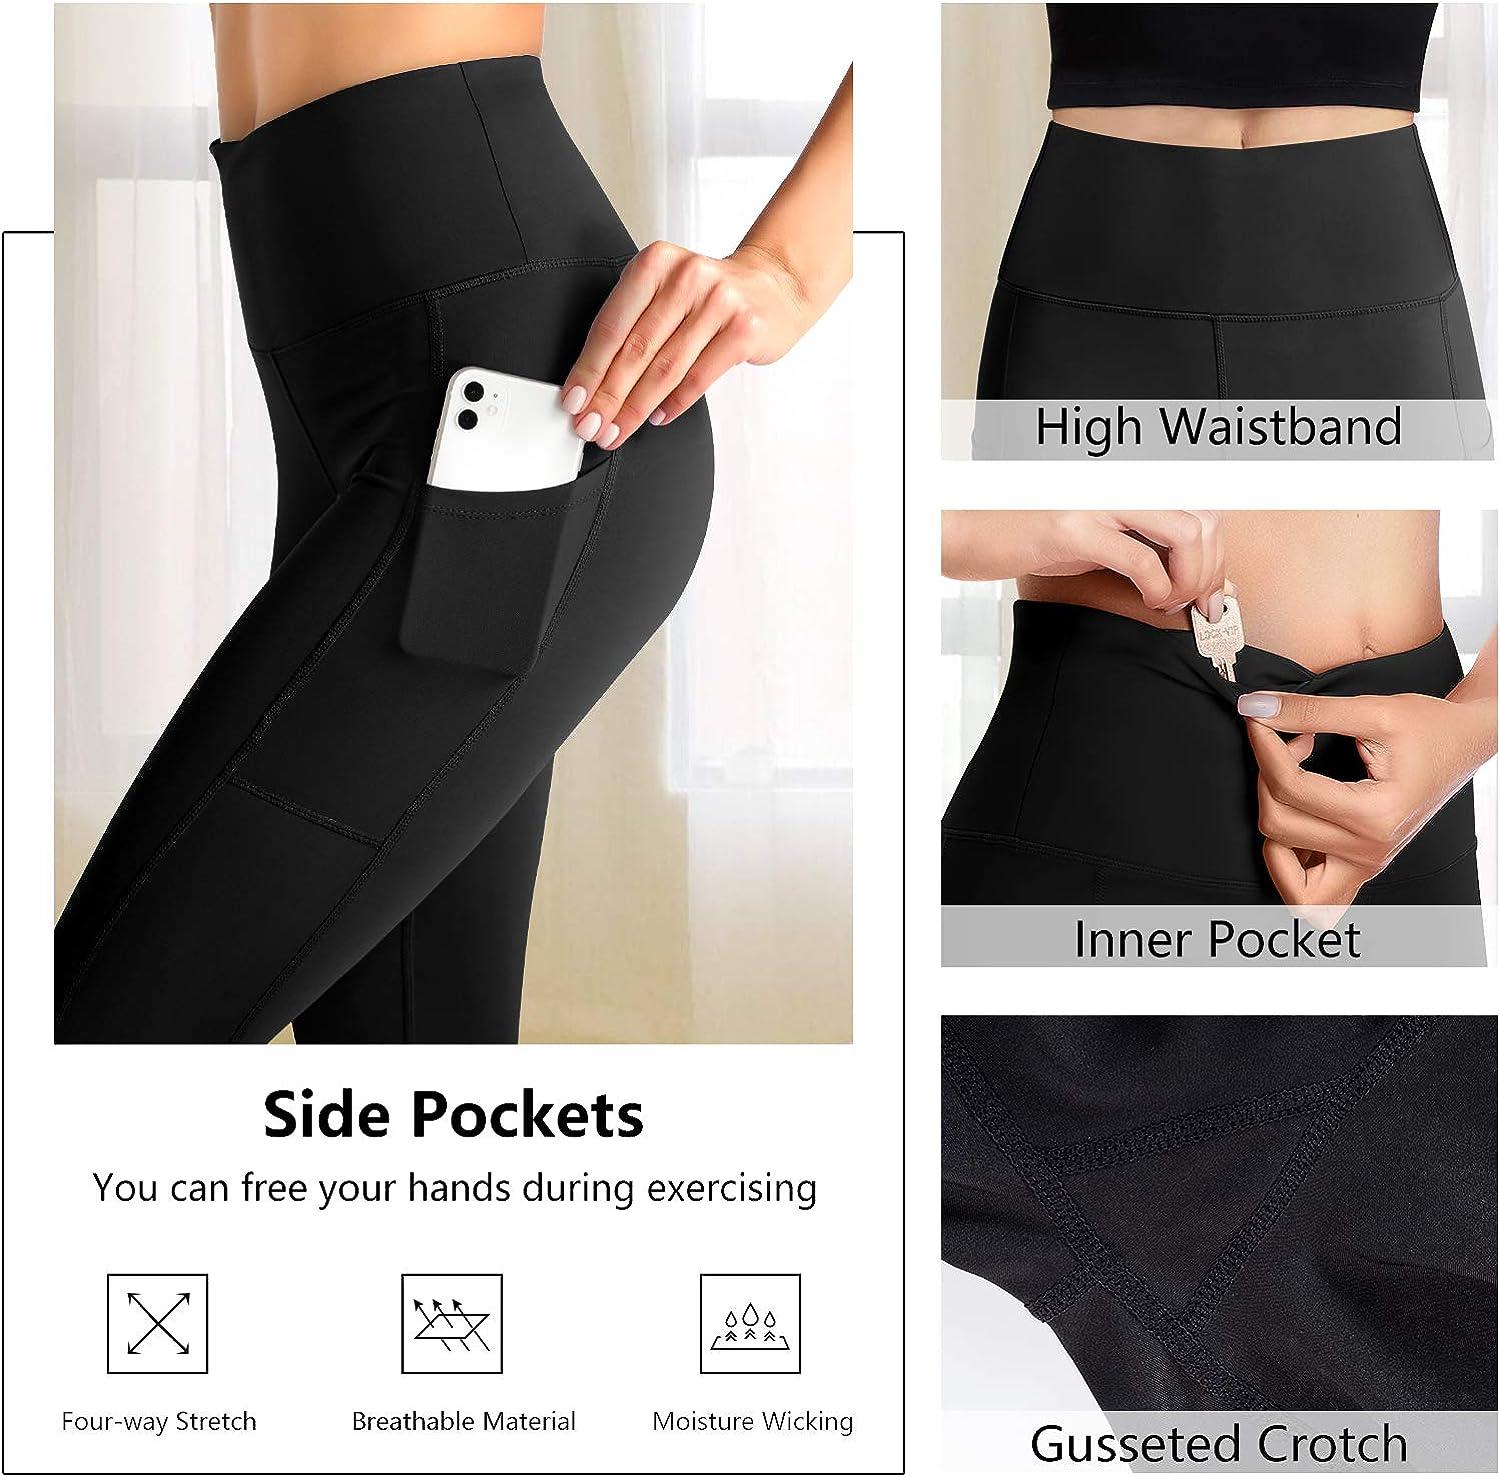 Buy DAYOUNG Bootcut Yoga Pants for Women Tummy Control Workout